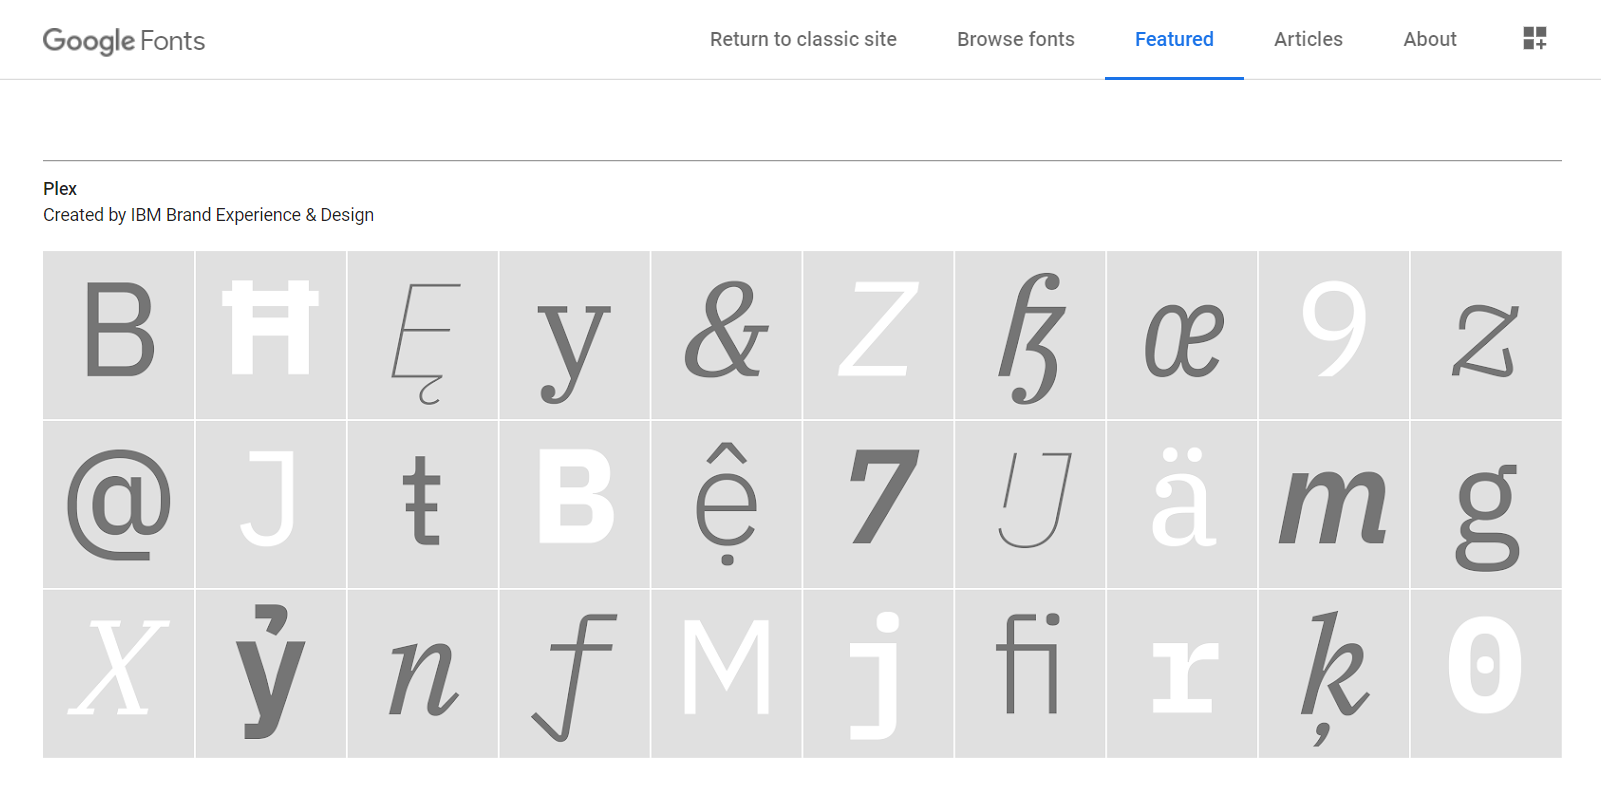 Google Fonts Features